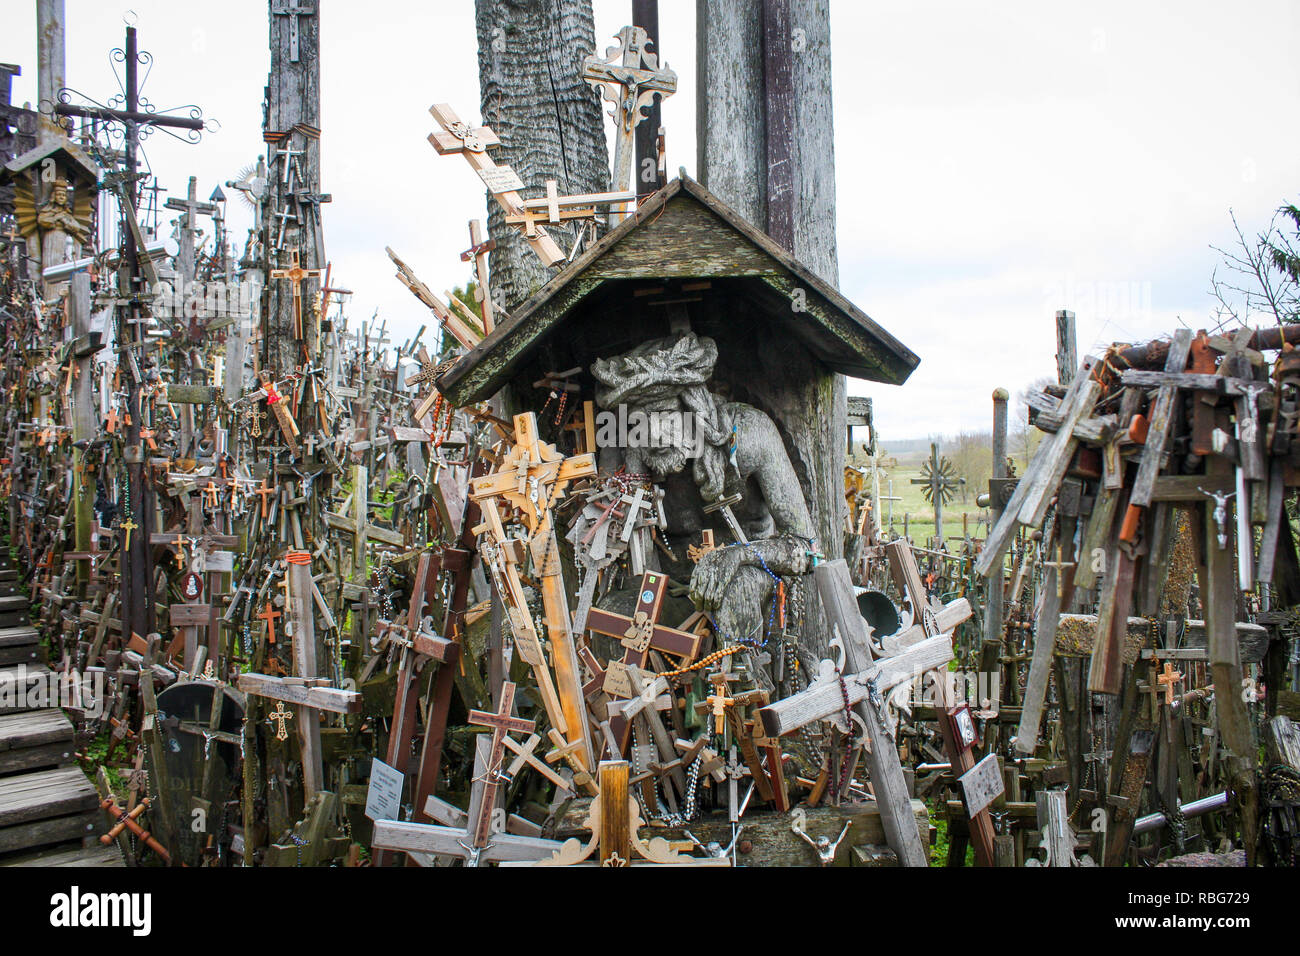 Lithuania, Siauliai: the Hill of Crosses. The Hill of Crosses, a pilgrimage site, symbol of Lithuanian defiance of foreign invaders, with over 100.000 Stock Photo